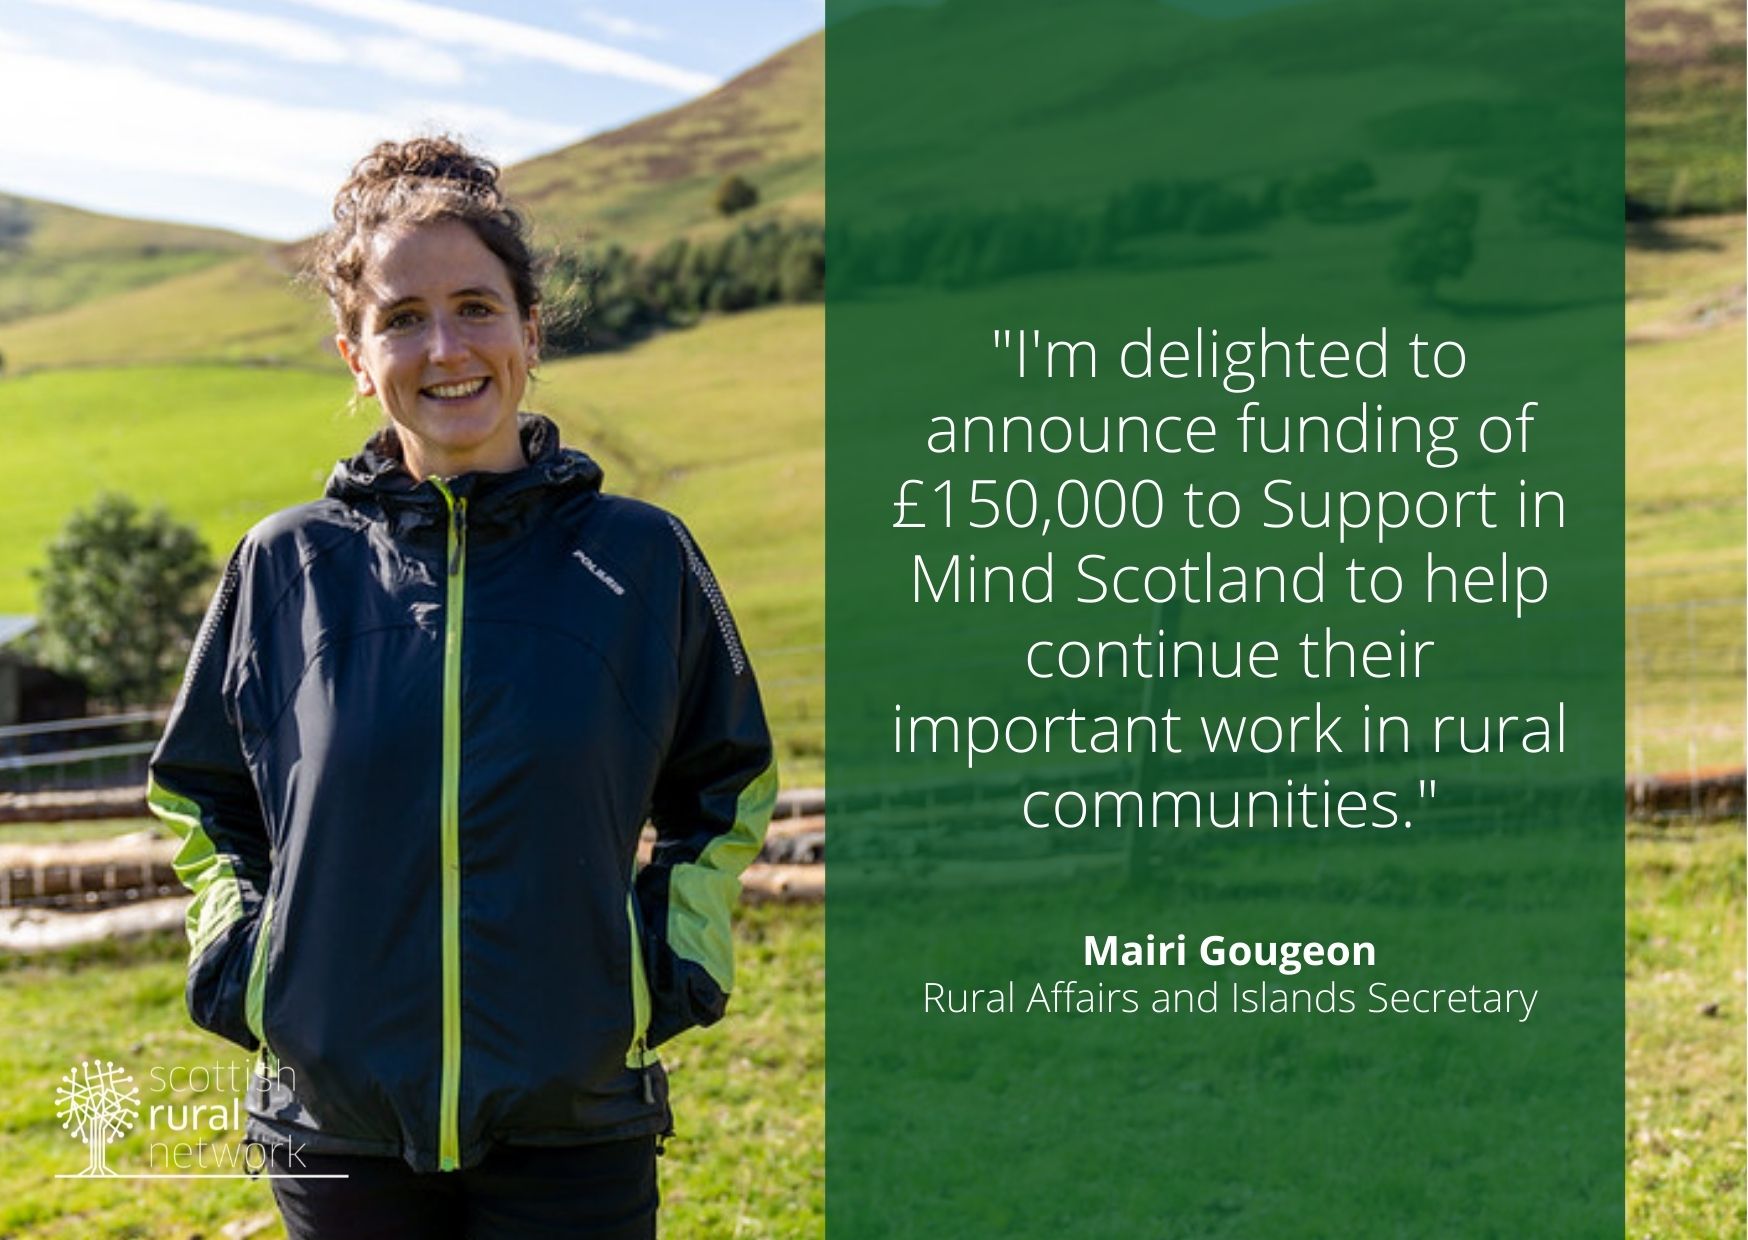 Rural Affairs and Islands Secretary, Mairi Gougeon with fields and hills in background